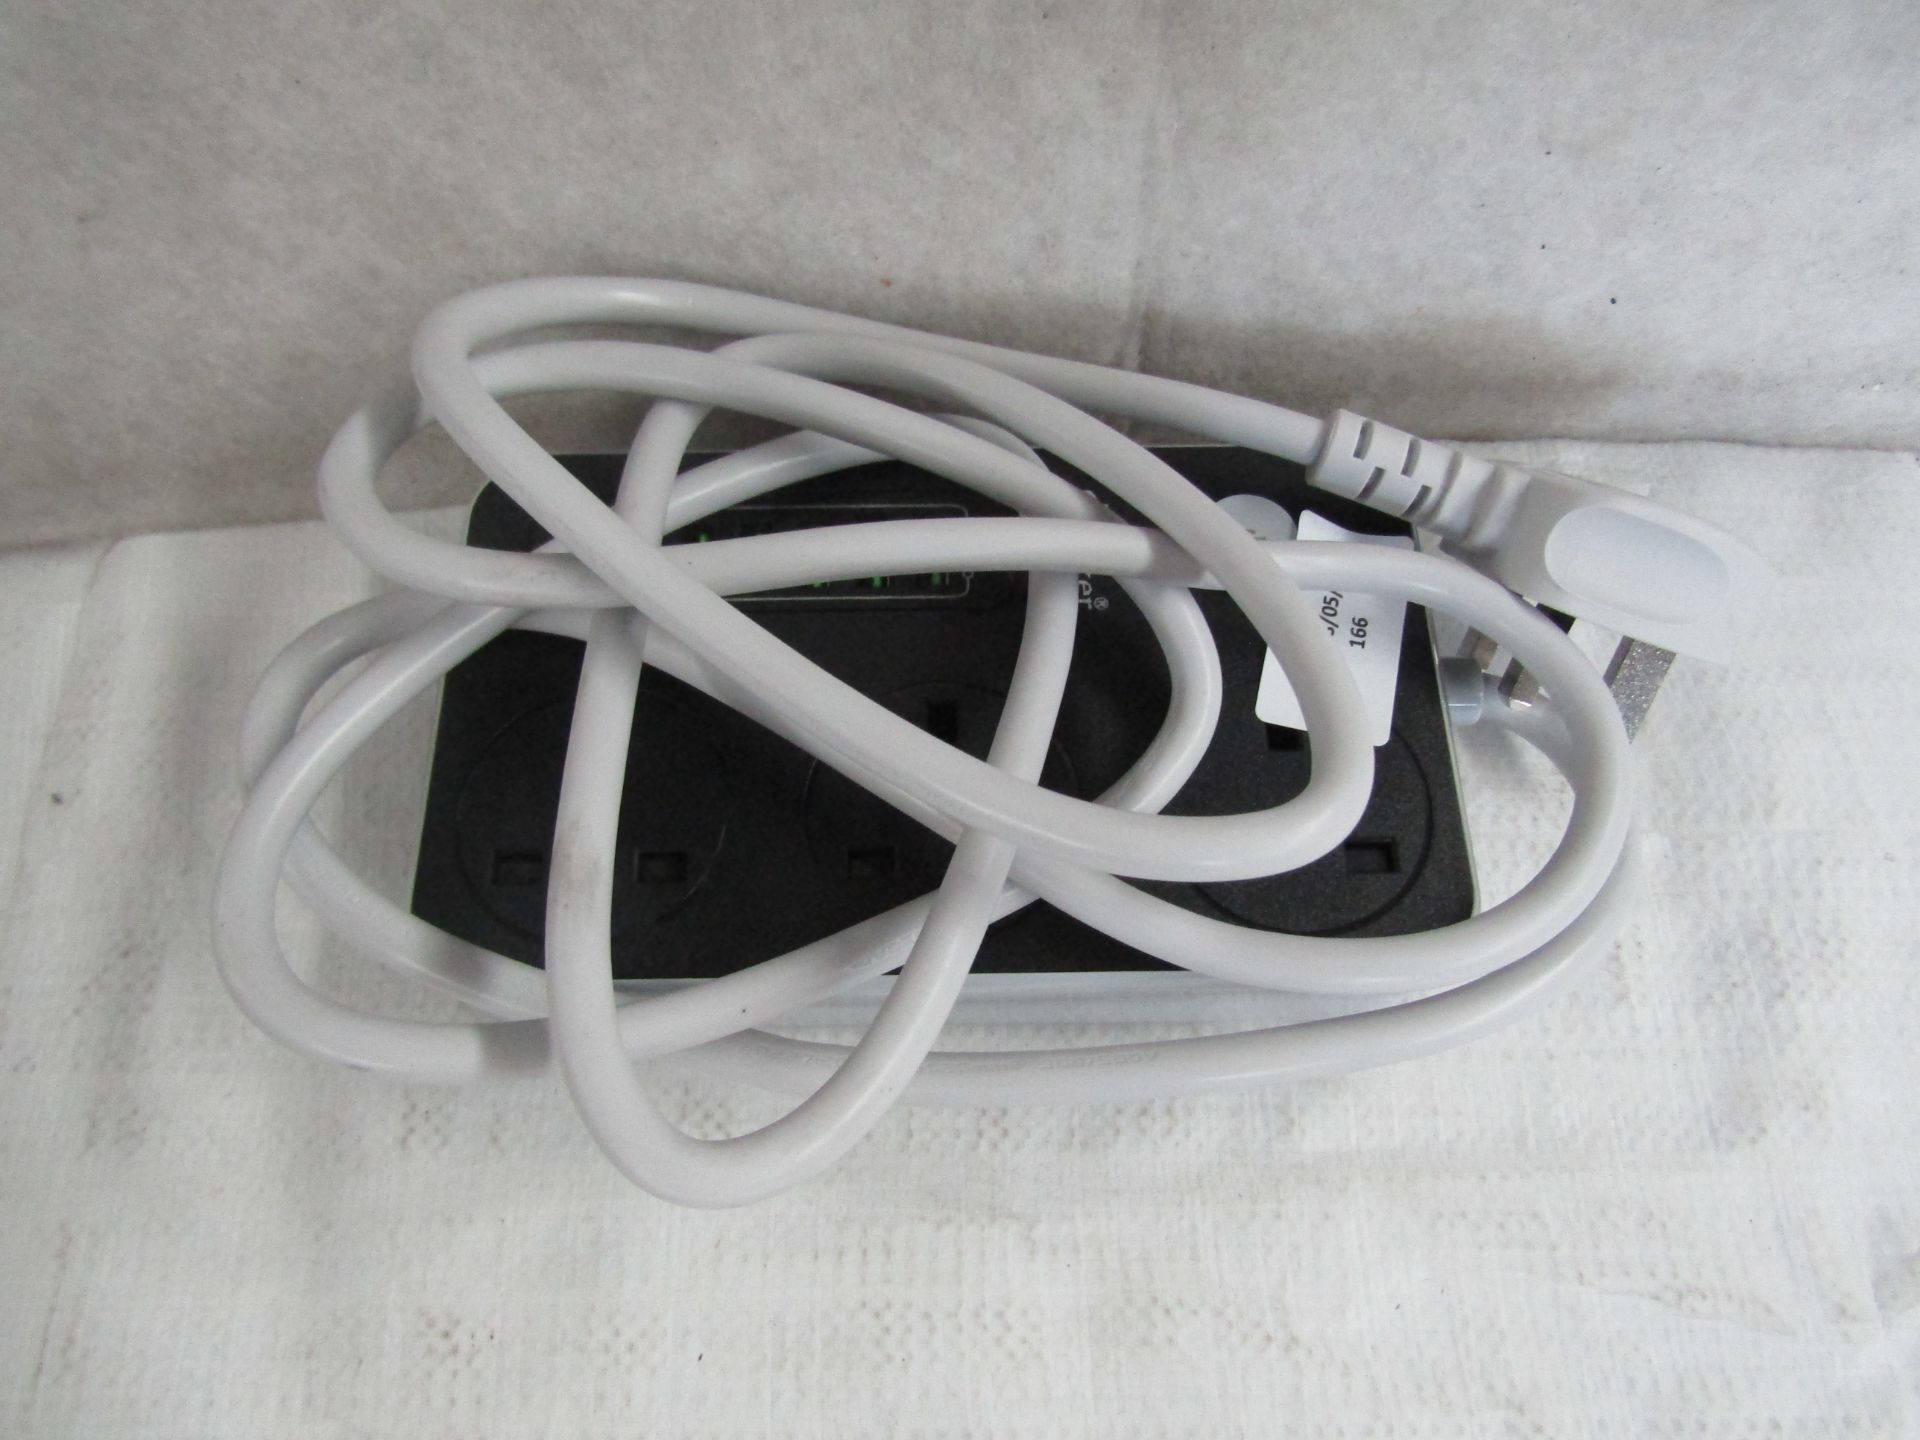 Hulker 3-Gang Extention Lead With 6 USB Ports - Untested & Unpackaged.